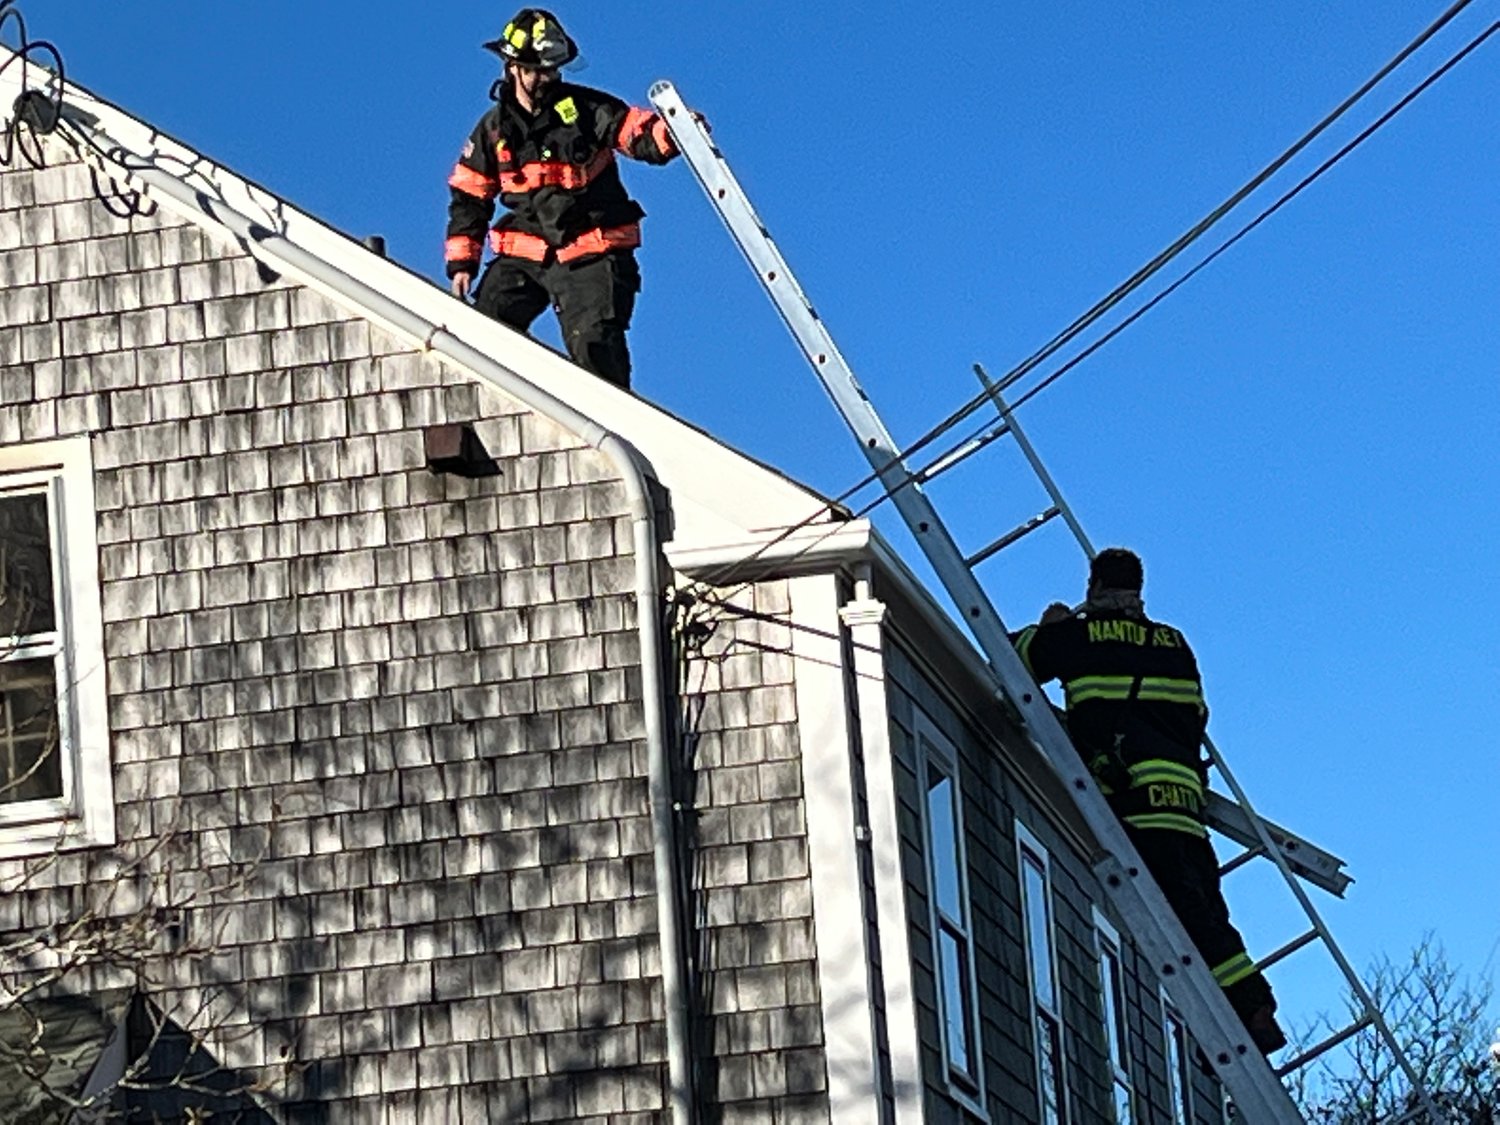 Firefighters climb down from the roof of 32 Vestal St.